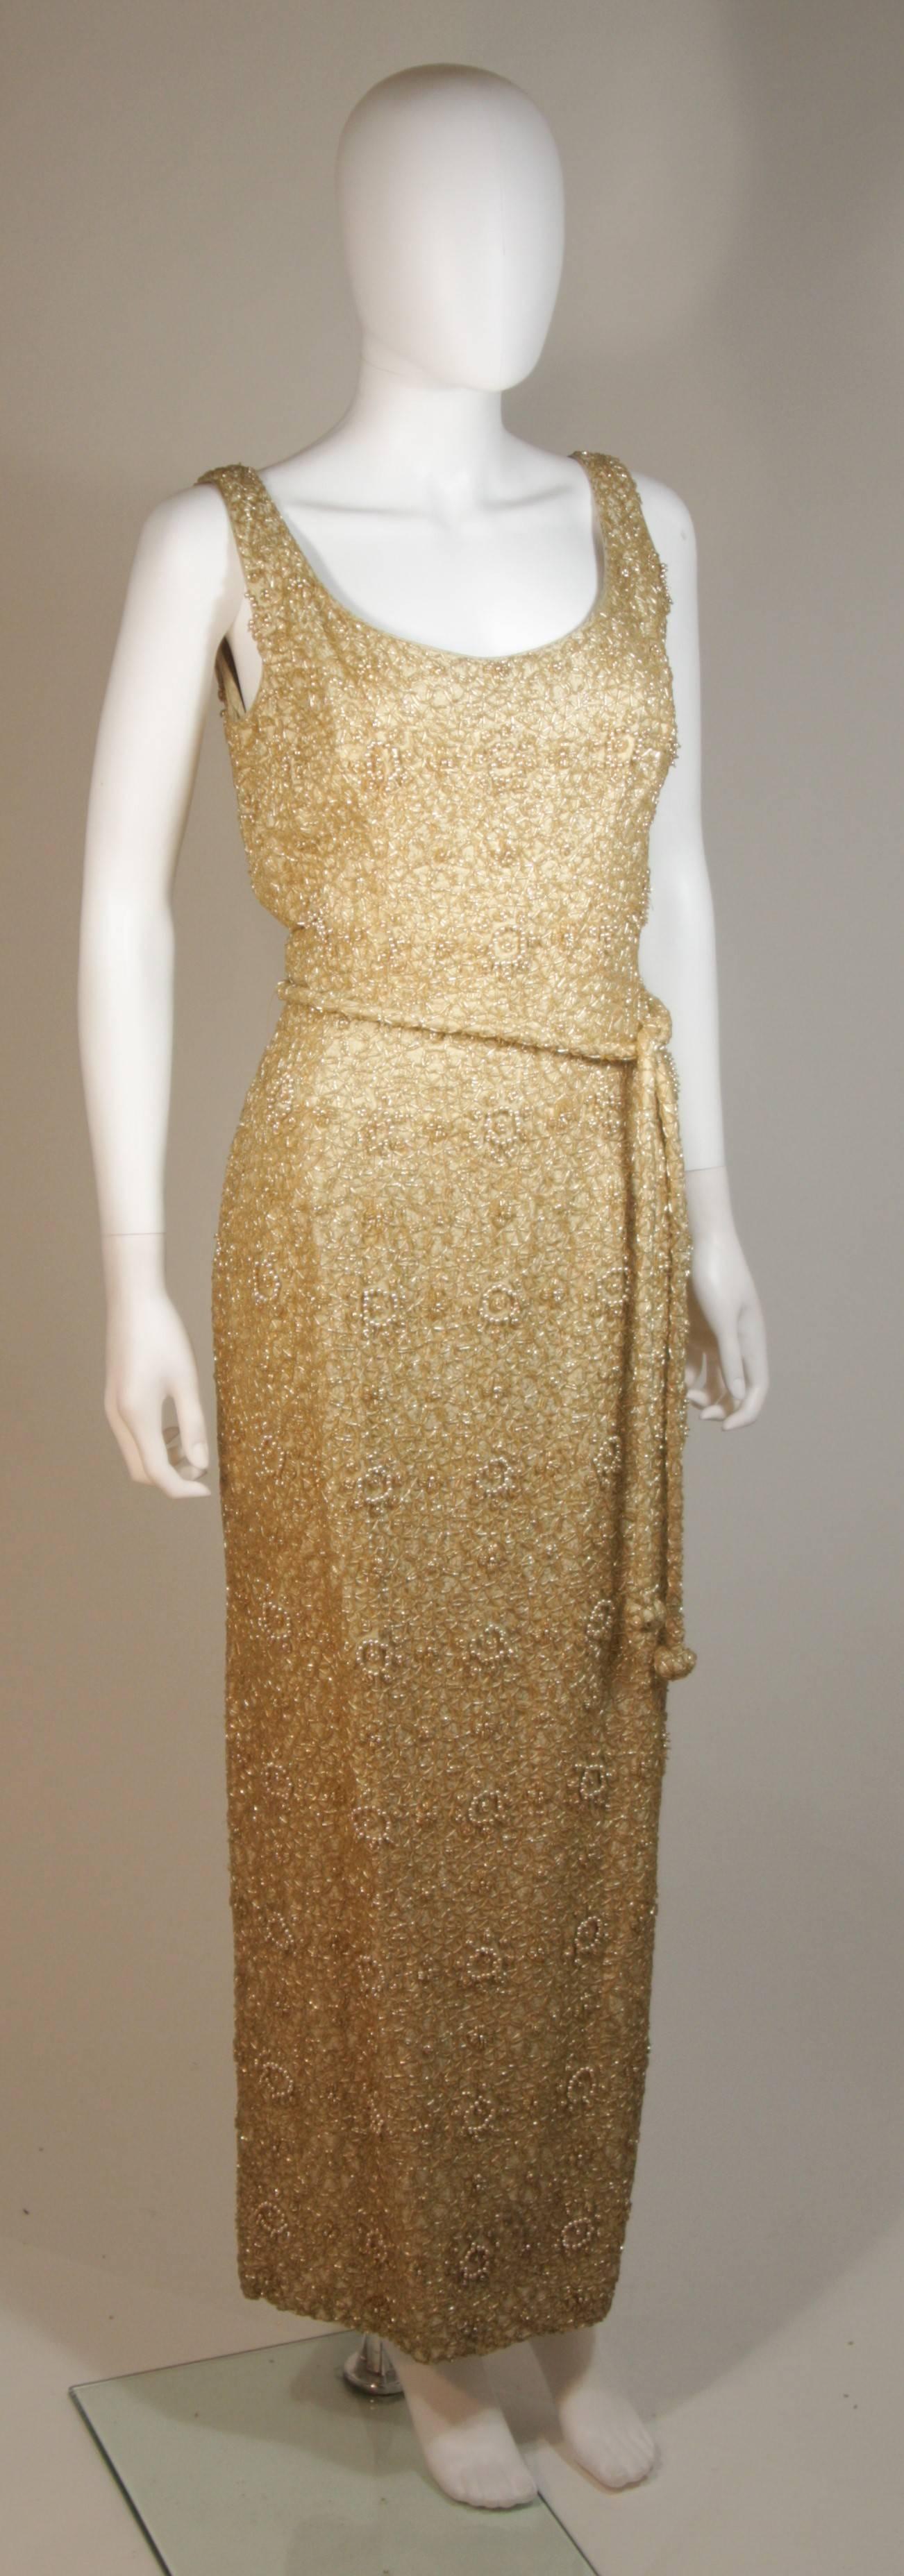 gold haute couture gown